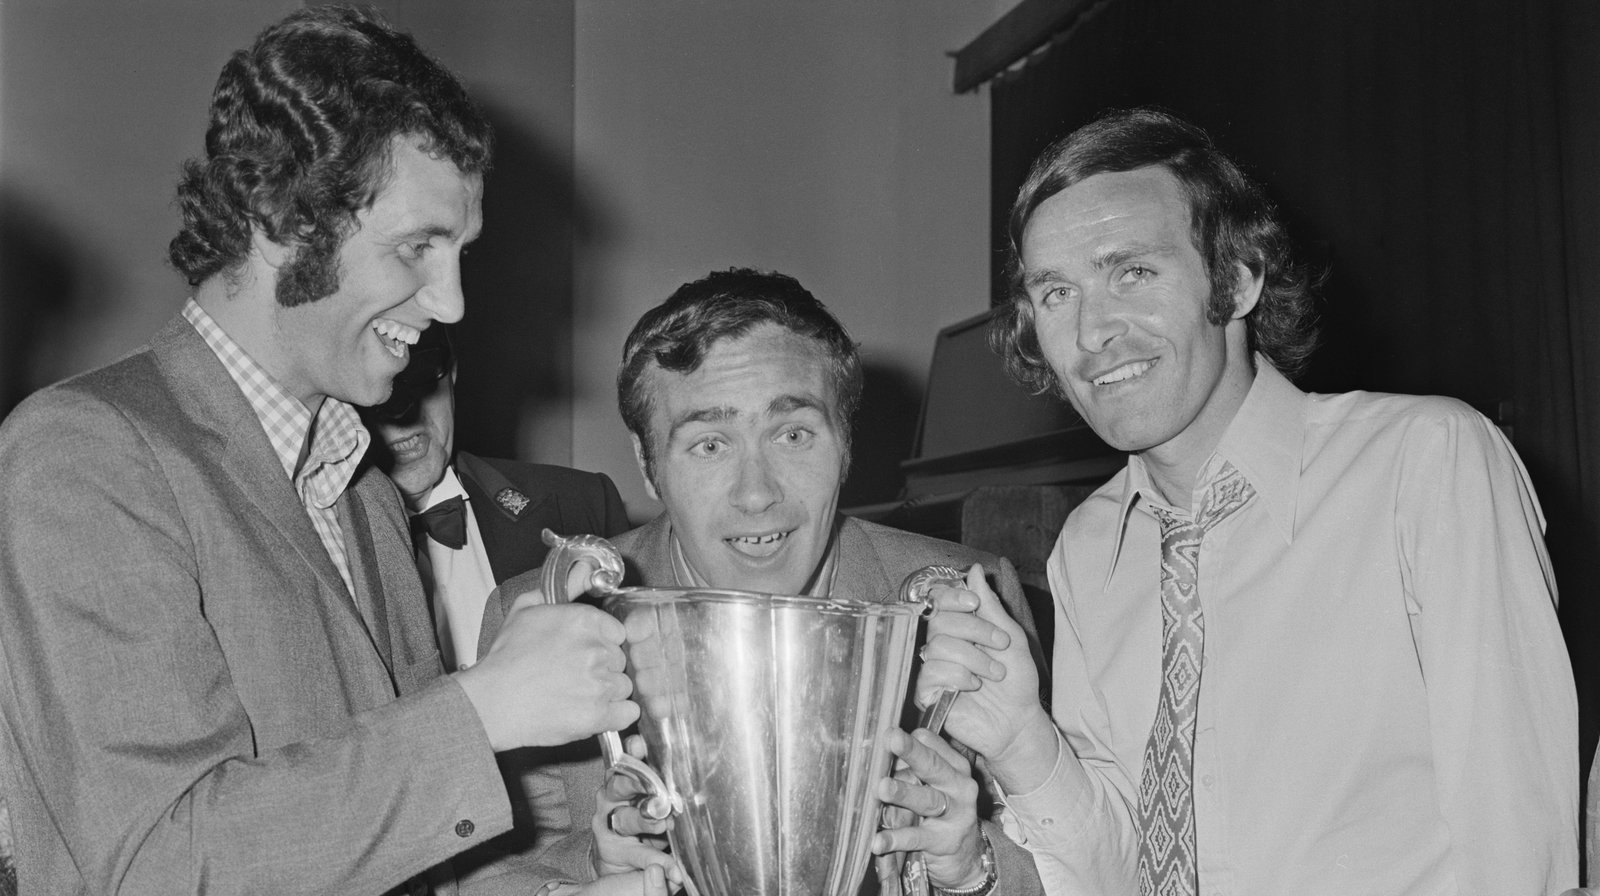 Image - Left to right, Peter Osgood, Ron Harris and John Dempsey in 1971 with the Cup Winners Cup